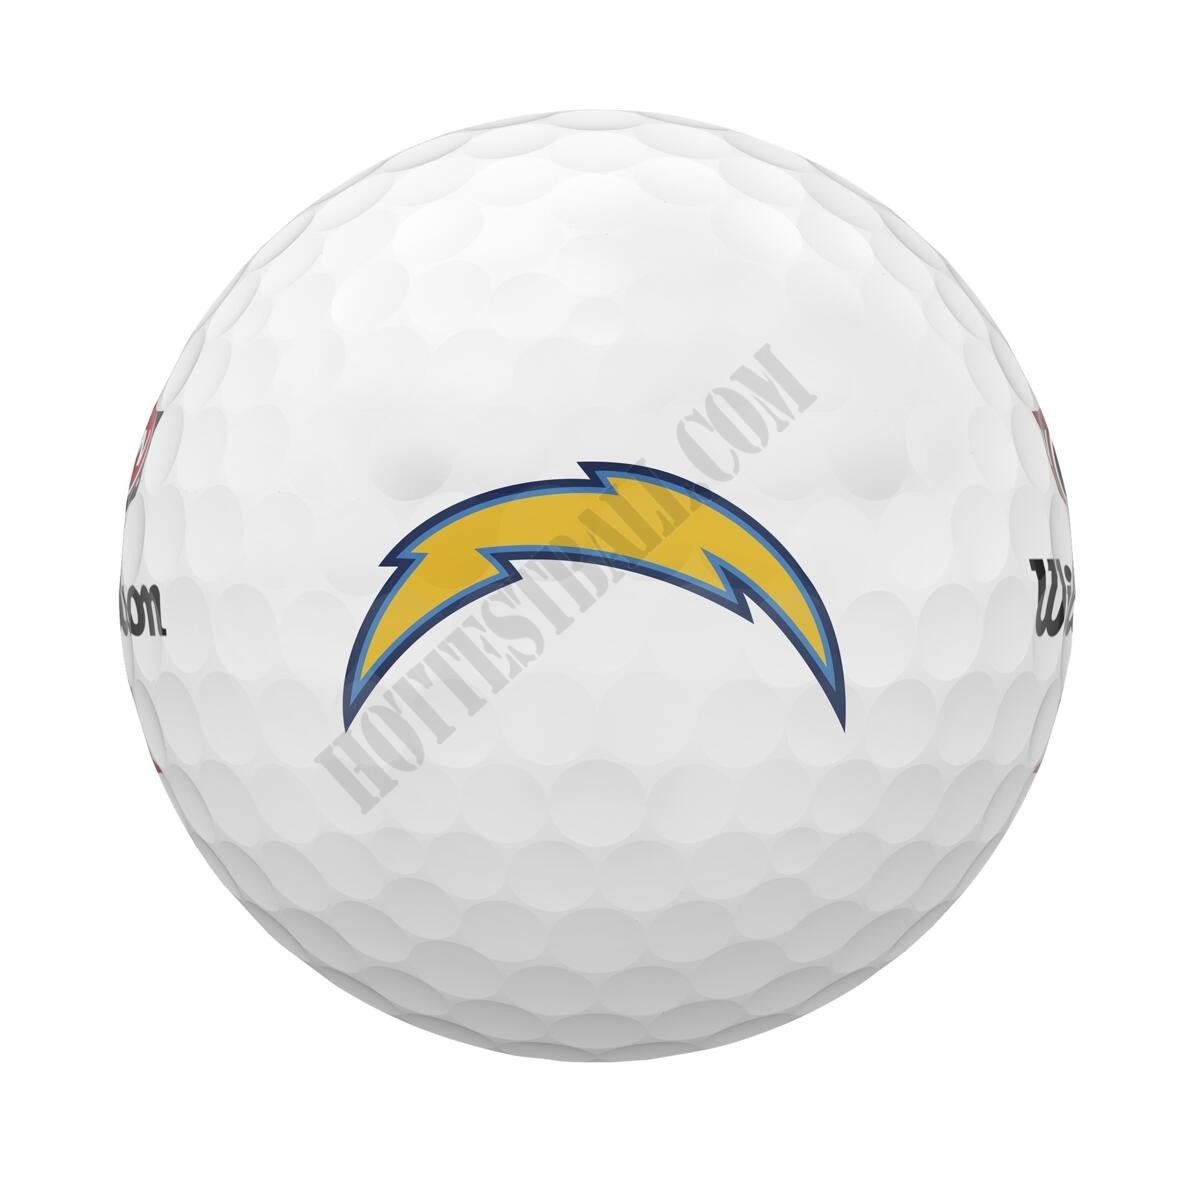 Duo Soft+ NFL Golf Balls - Los Angeles Chargers - Wilson Discount Store - -1